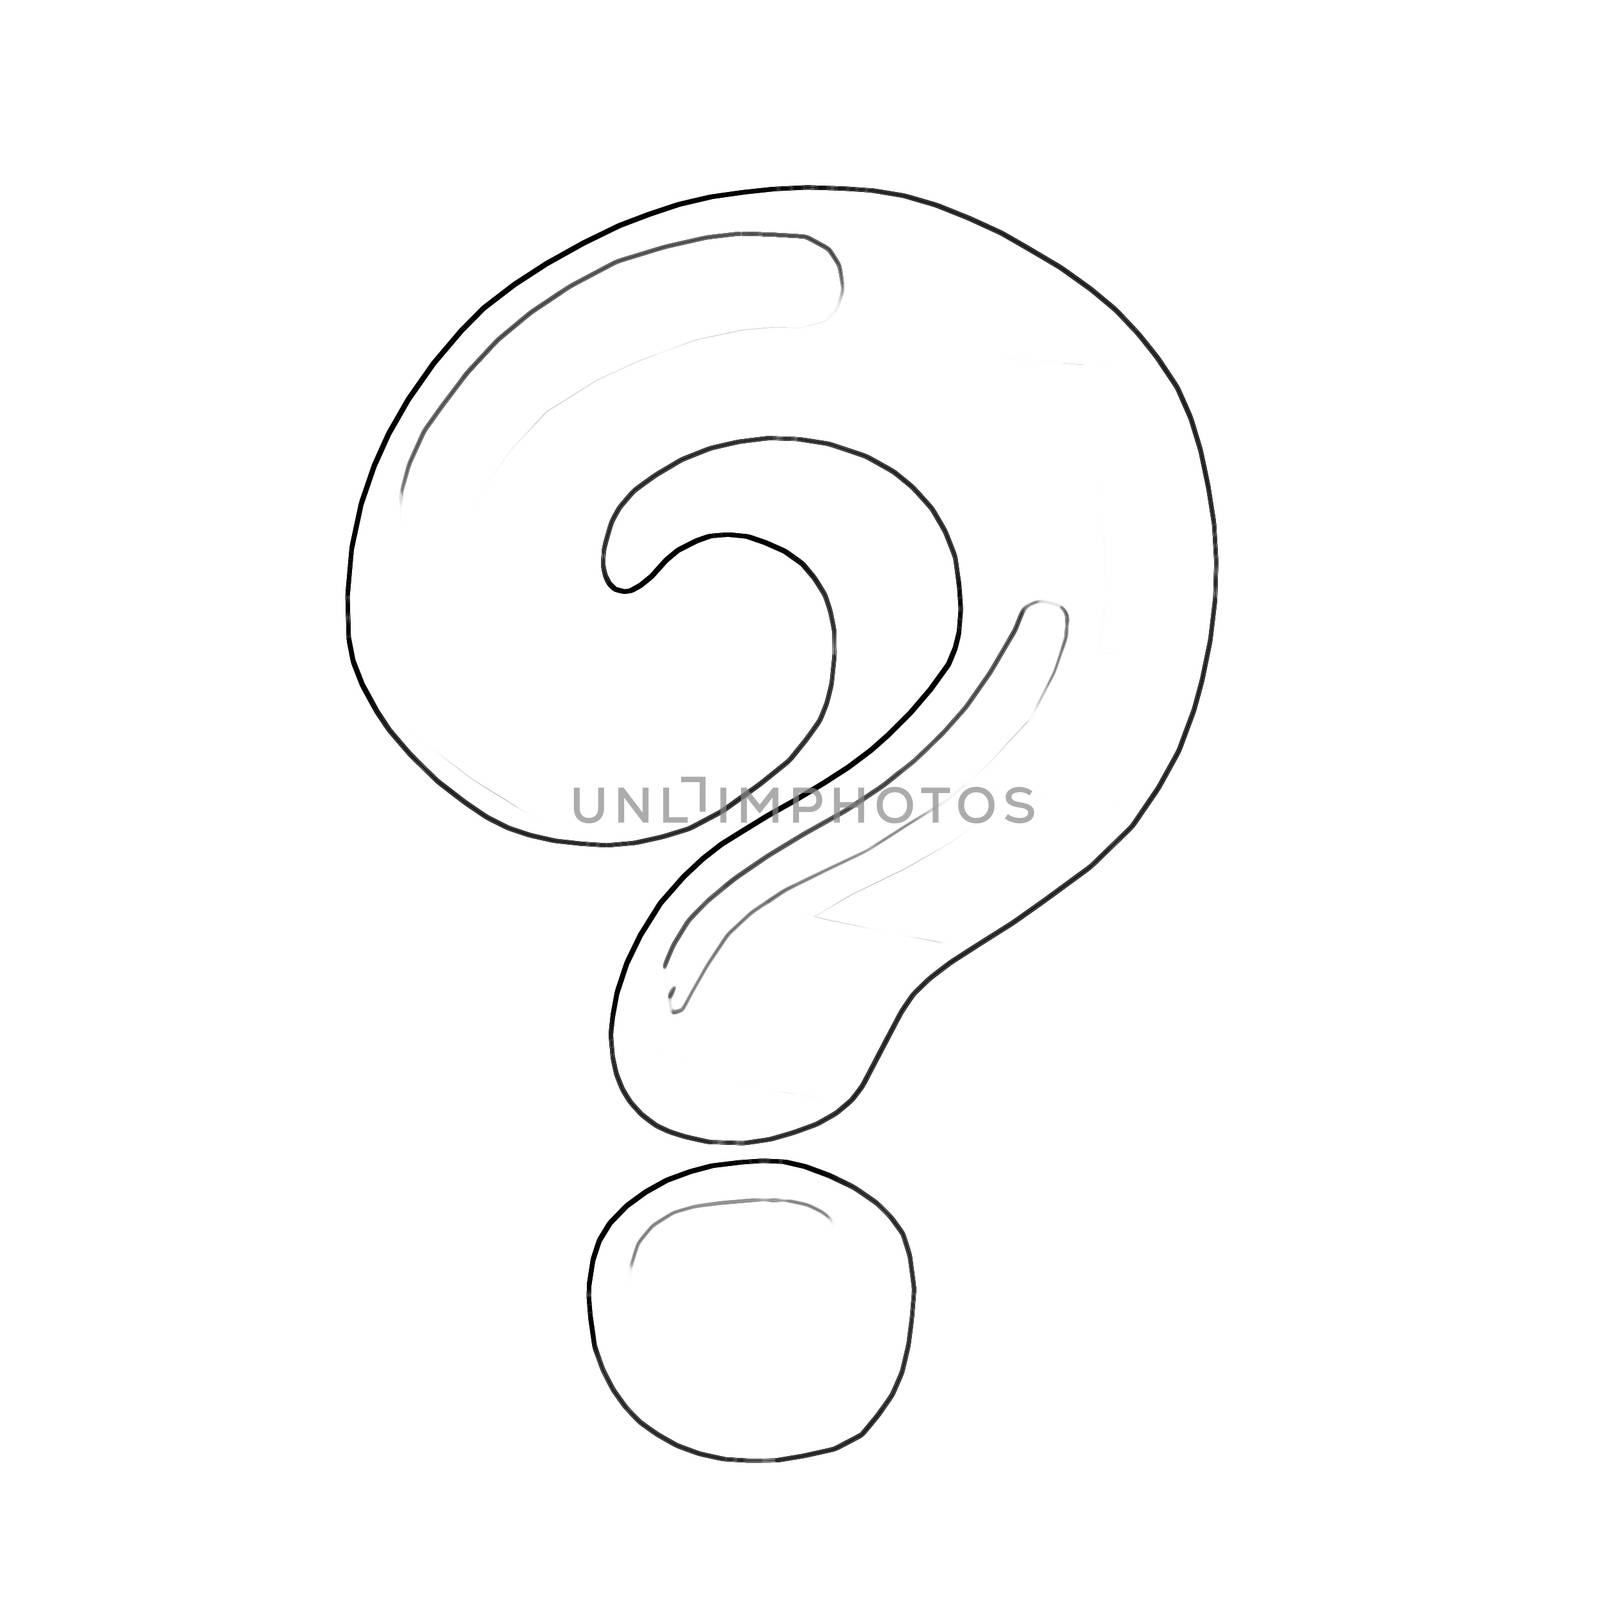 Illustration: Coloring Book Series: Question Mark. Soft thin line. Print it and bring it to Life with Color! Fantastic Outline / Sketch / Line Art Design.